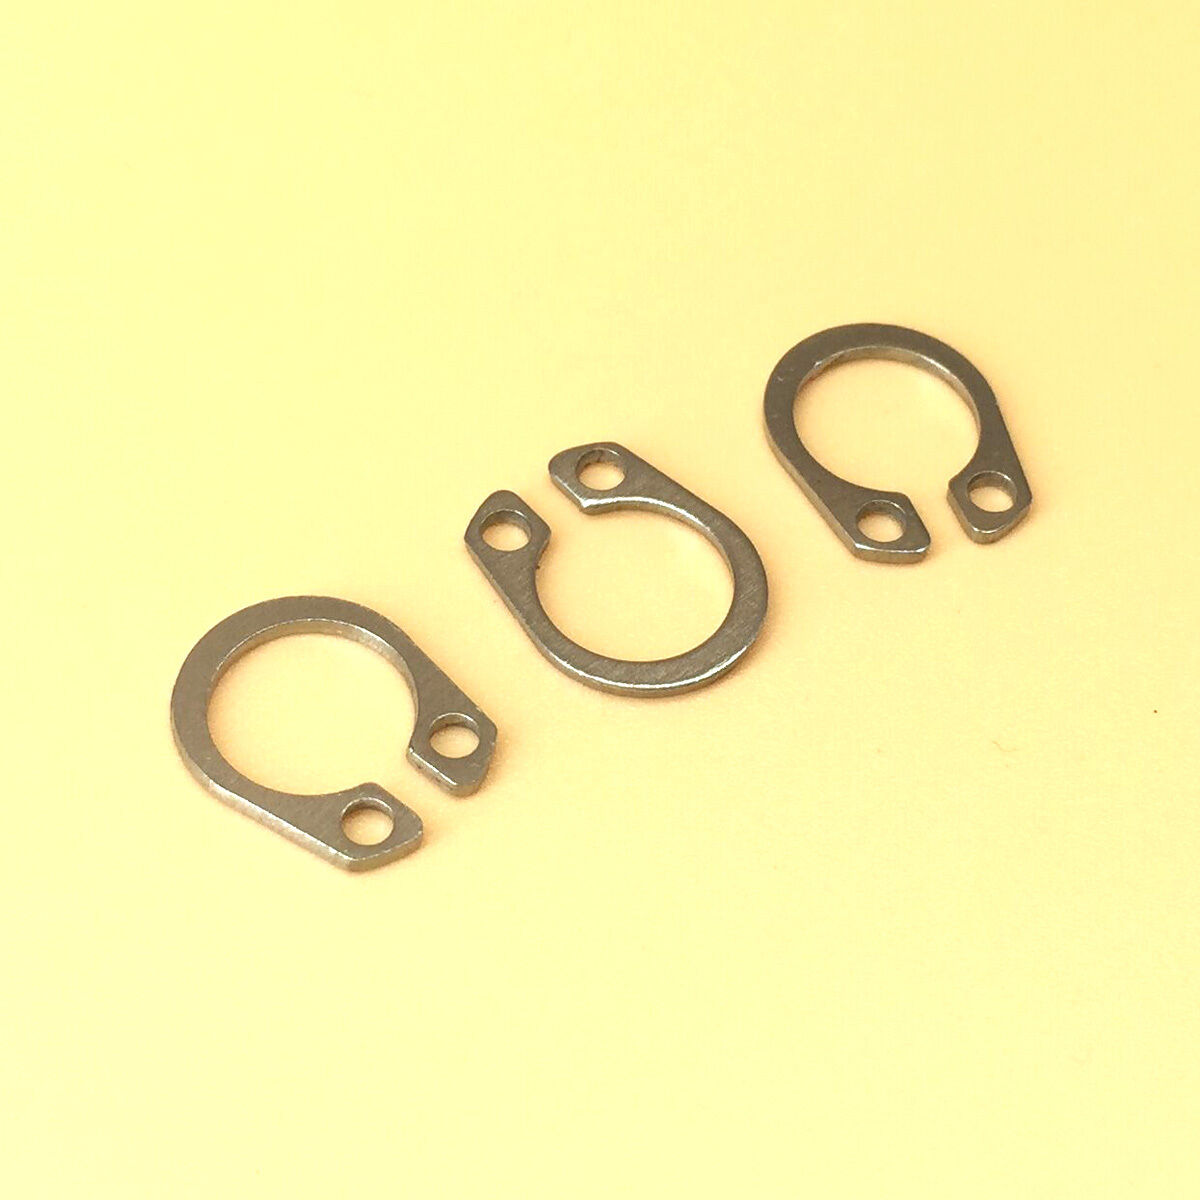 15 kinds of 304 Stainless Steel External Circlip Retaining Ring Snap Ring Kit